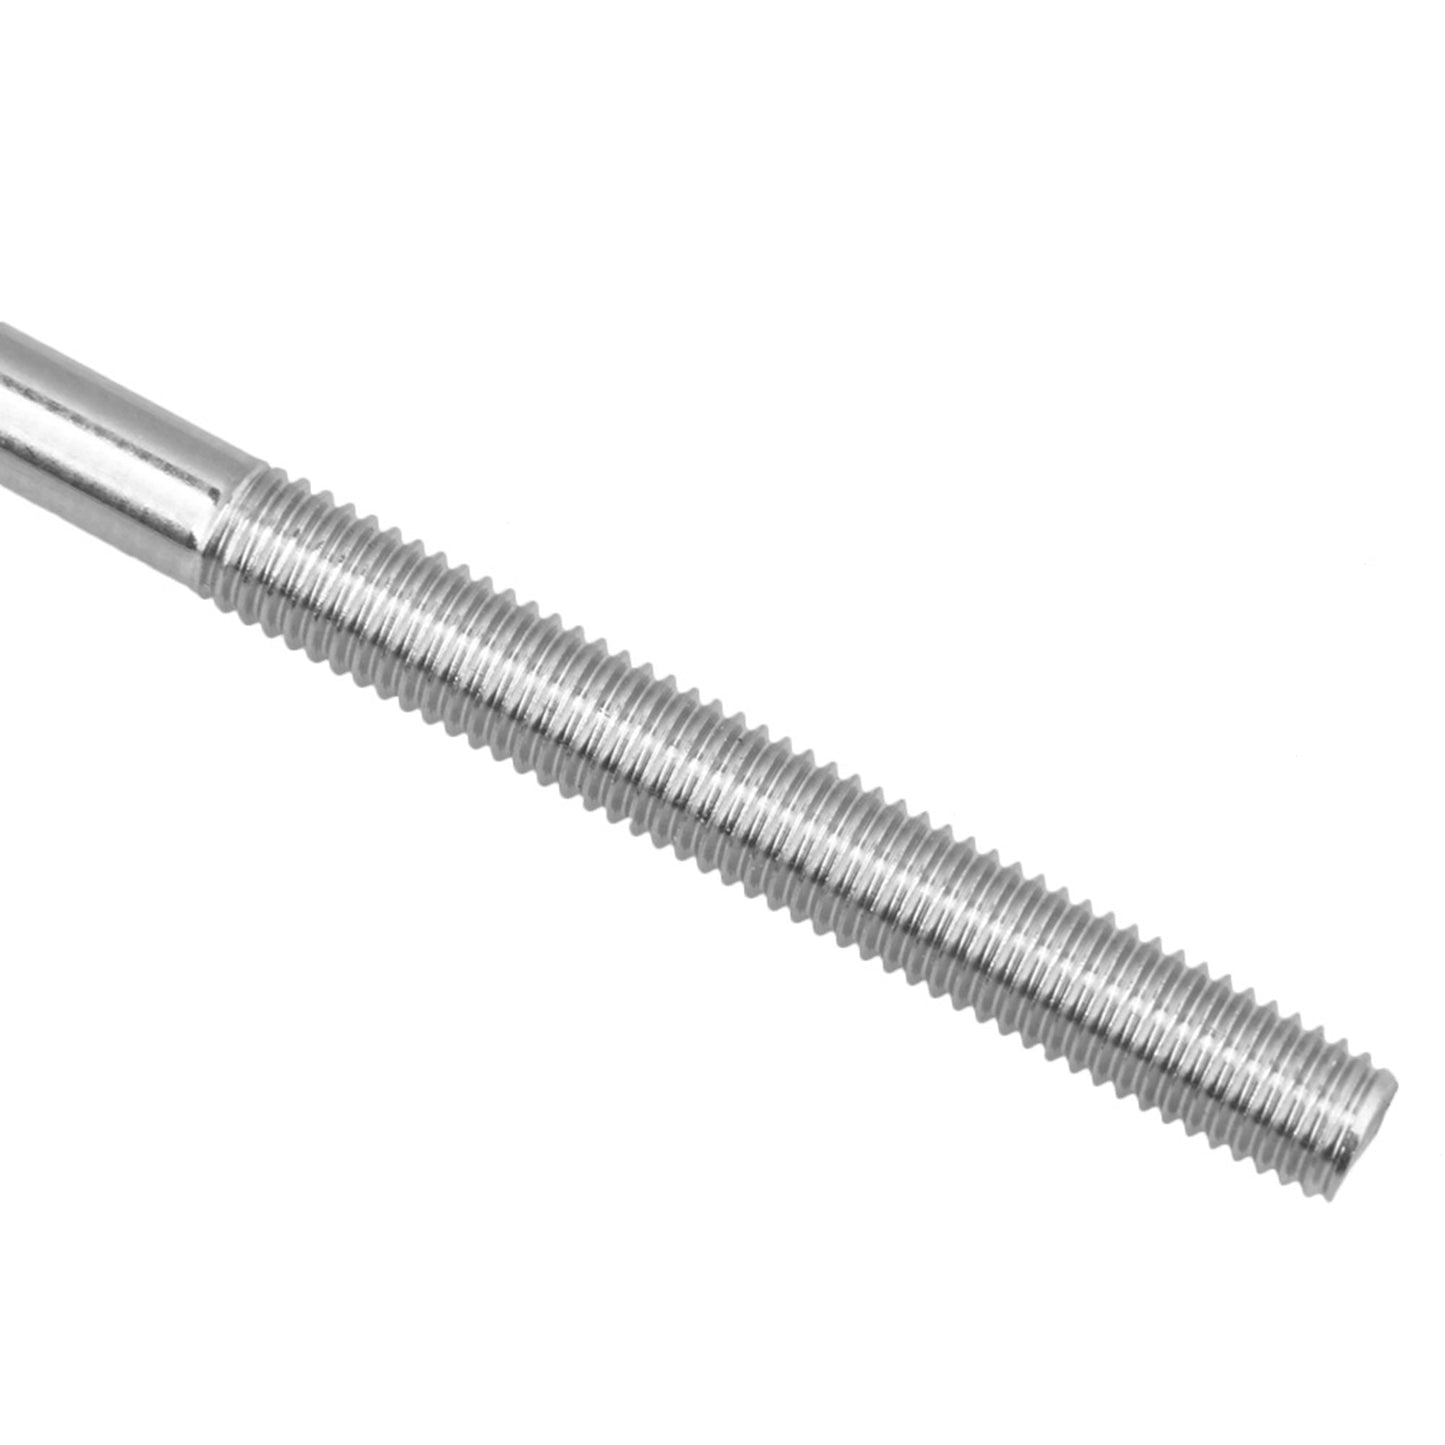 BQLZR 304 Stainless Steel Square U-Shaped Bolt M8x105x130mm Fixed Axle Parts Sliver